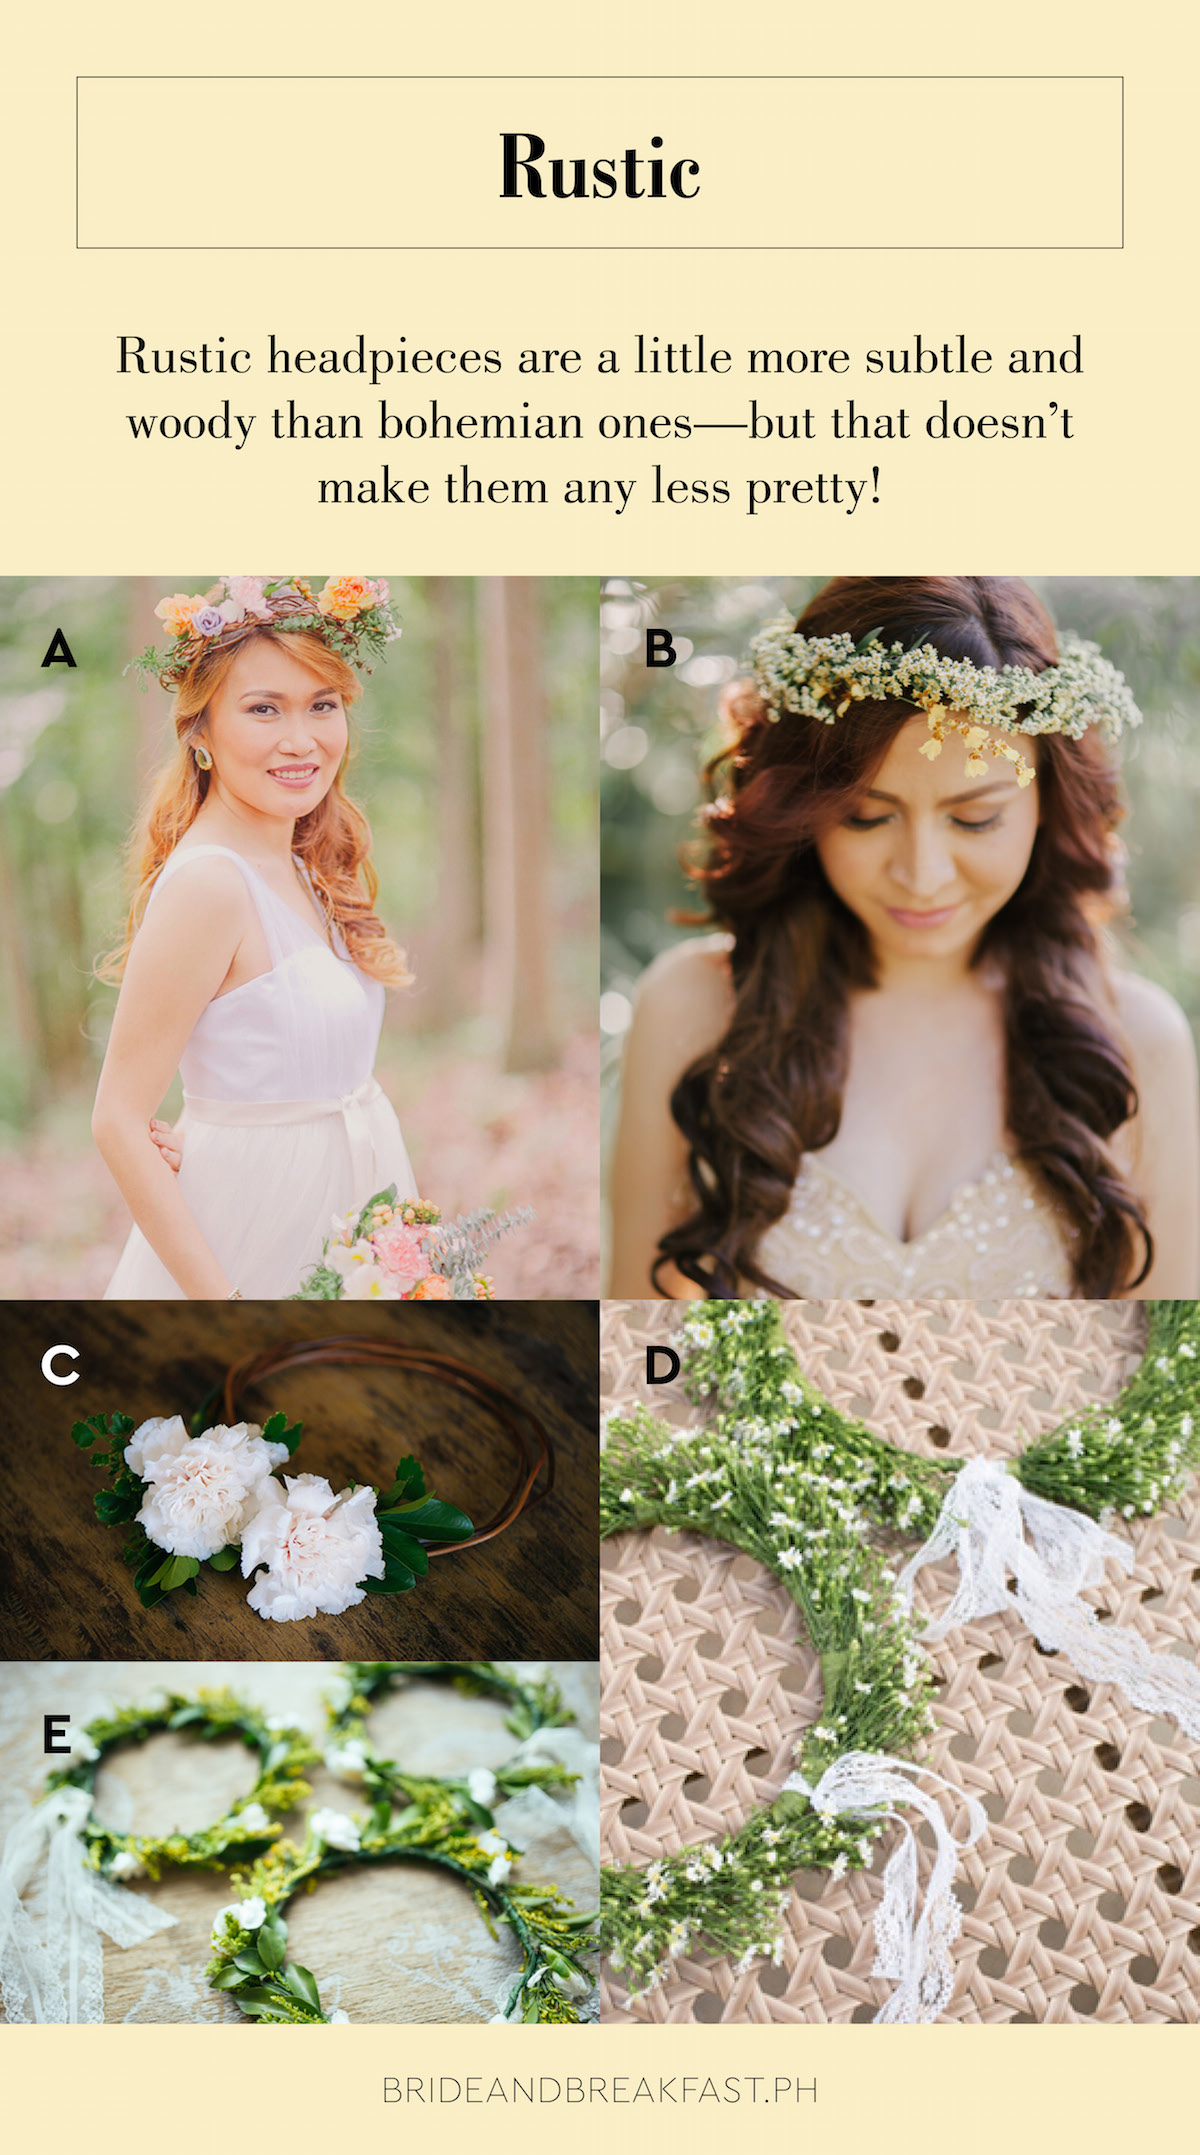 Rustic Rustic headpieces are a little more subtle and woody than bohemian ones--but that doesn't make them any less pretty!